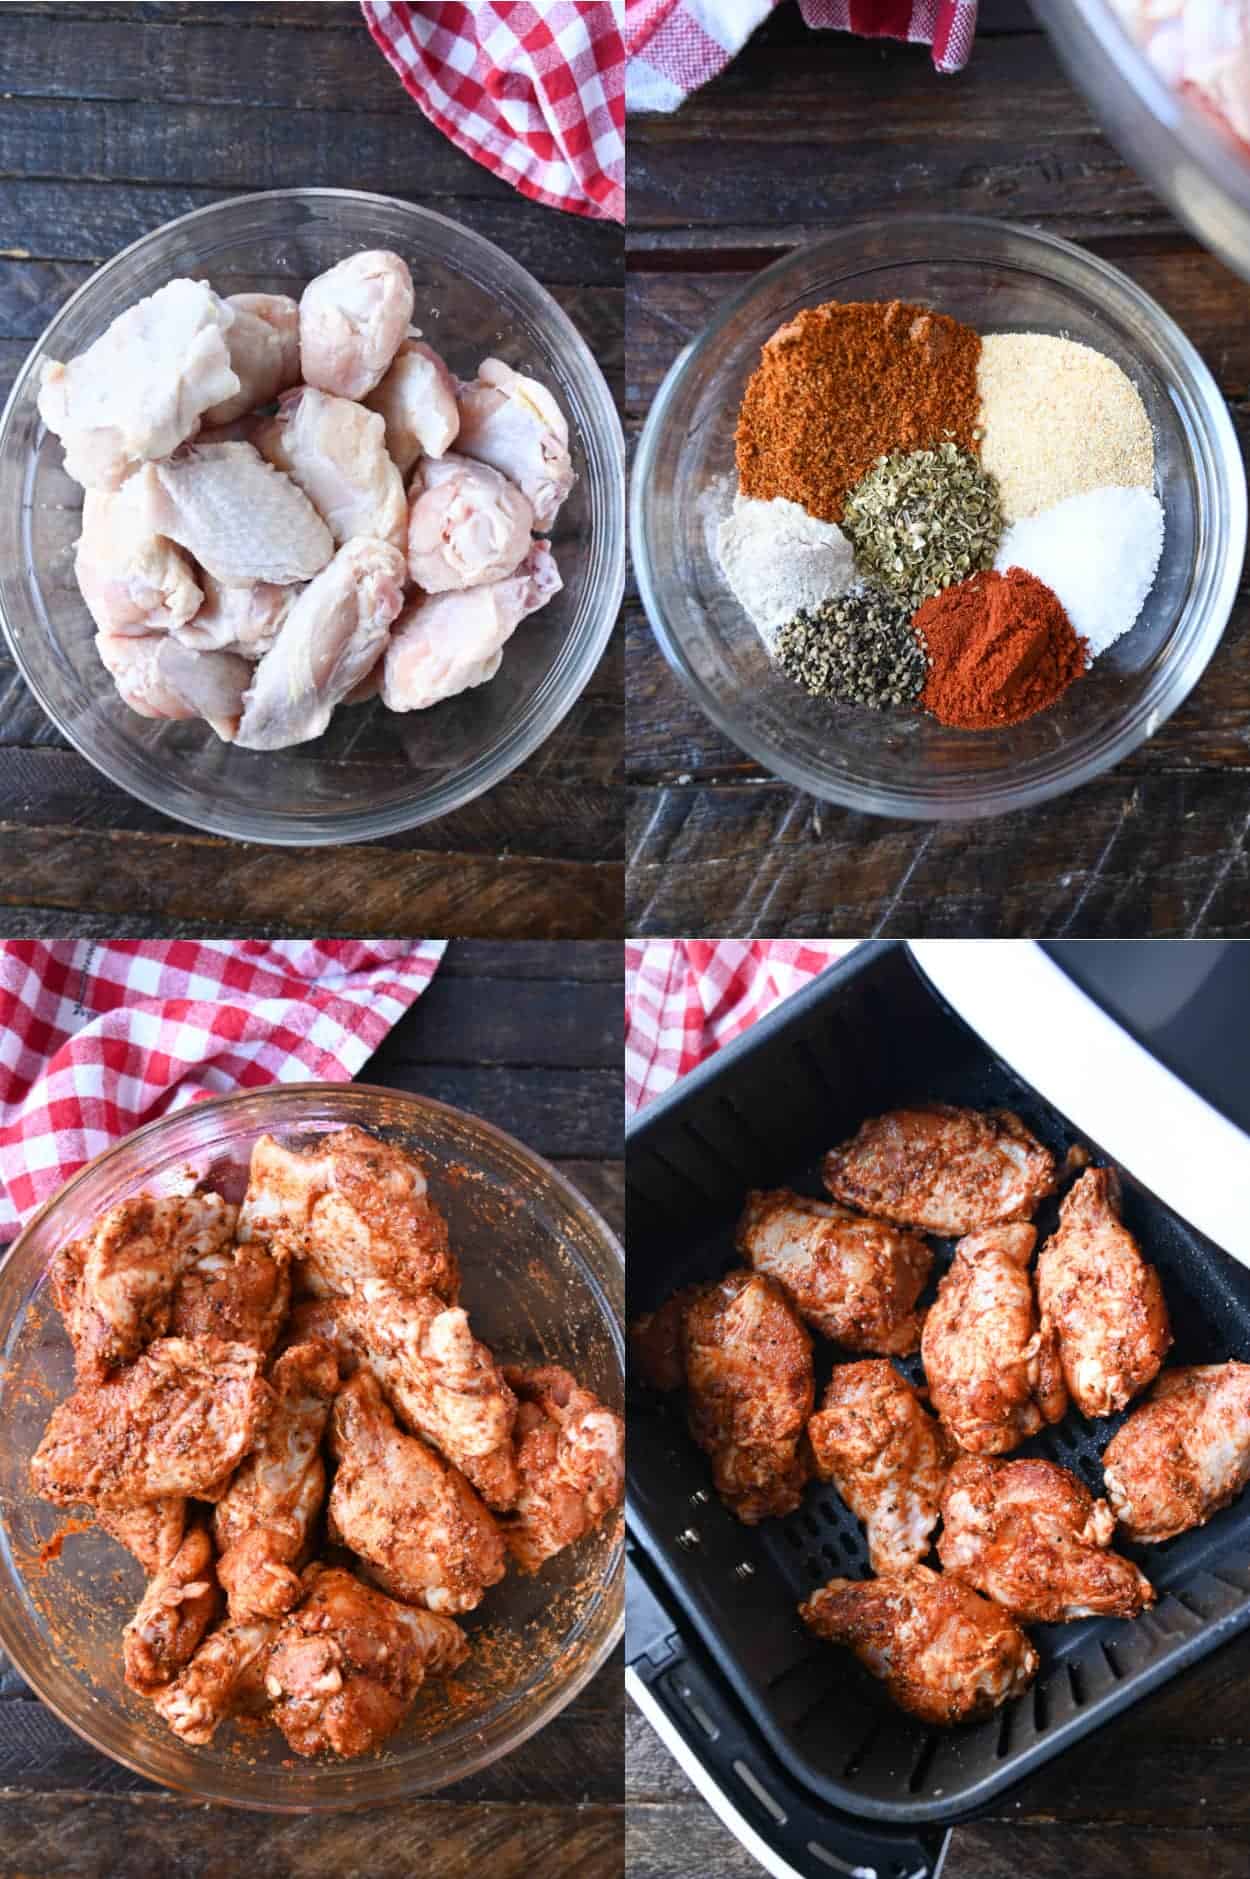 Four process photos. First one, raw chicken wings in a large clear bowl. Second one, all the spices in a small clear bowl. Third one, spices have been tossed with the chicken wings. Fourth one, chicken wings placed in the air fryer basket.